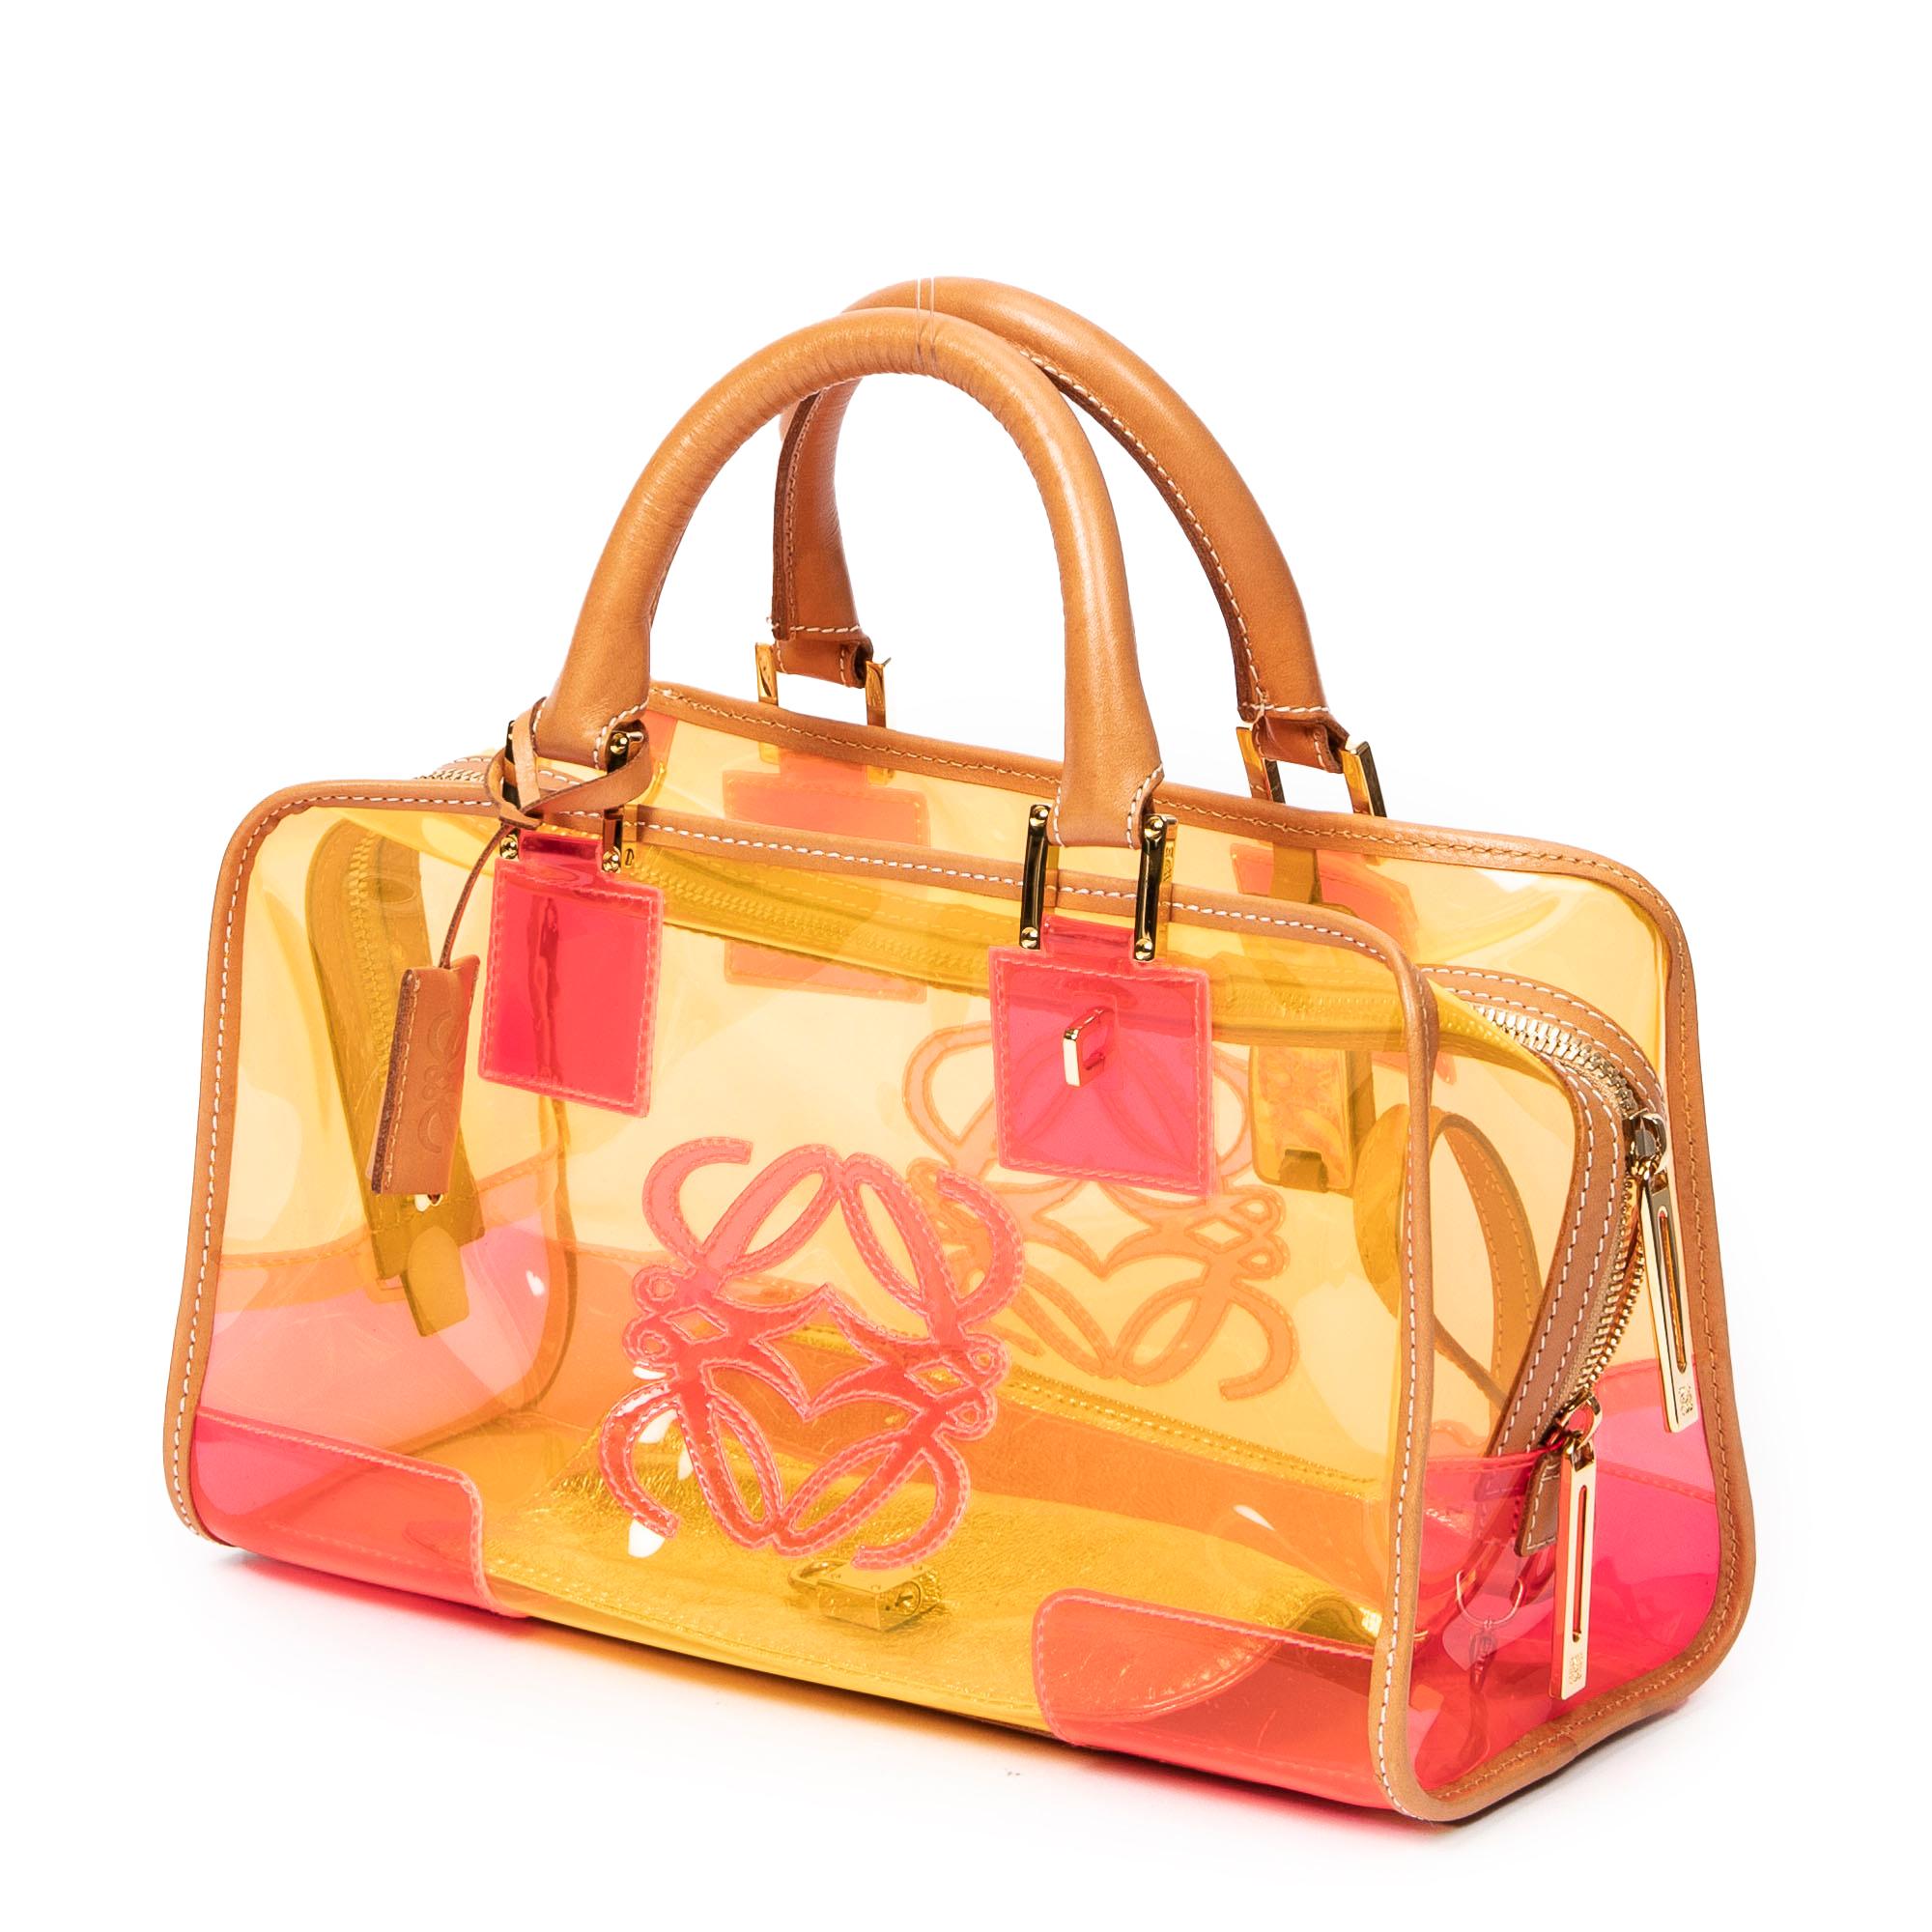 Embrace bold fashion with the Coral Pink Primavera/Verano 2008 Amazona. The coral pink PVC and gold accents catch attention, while the removable pouch within the PVC interior adds practicality. Loewe's signature creativity is epitomized in this